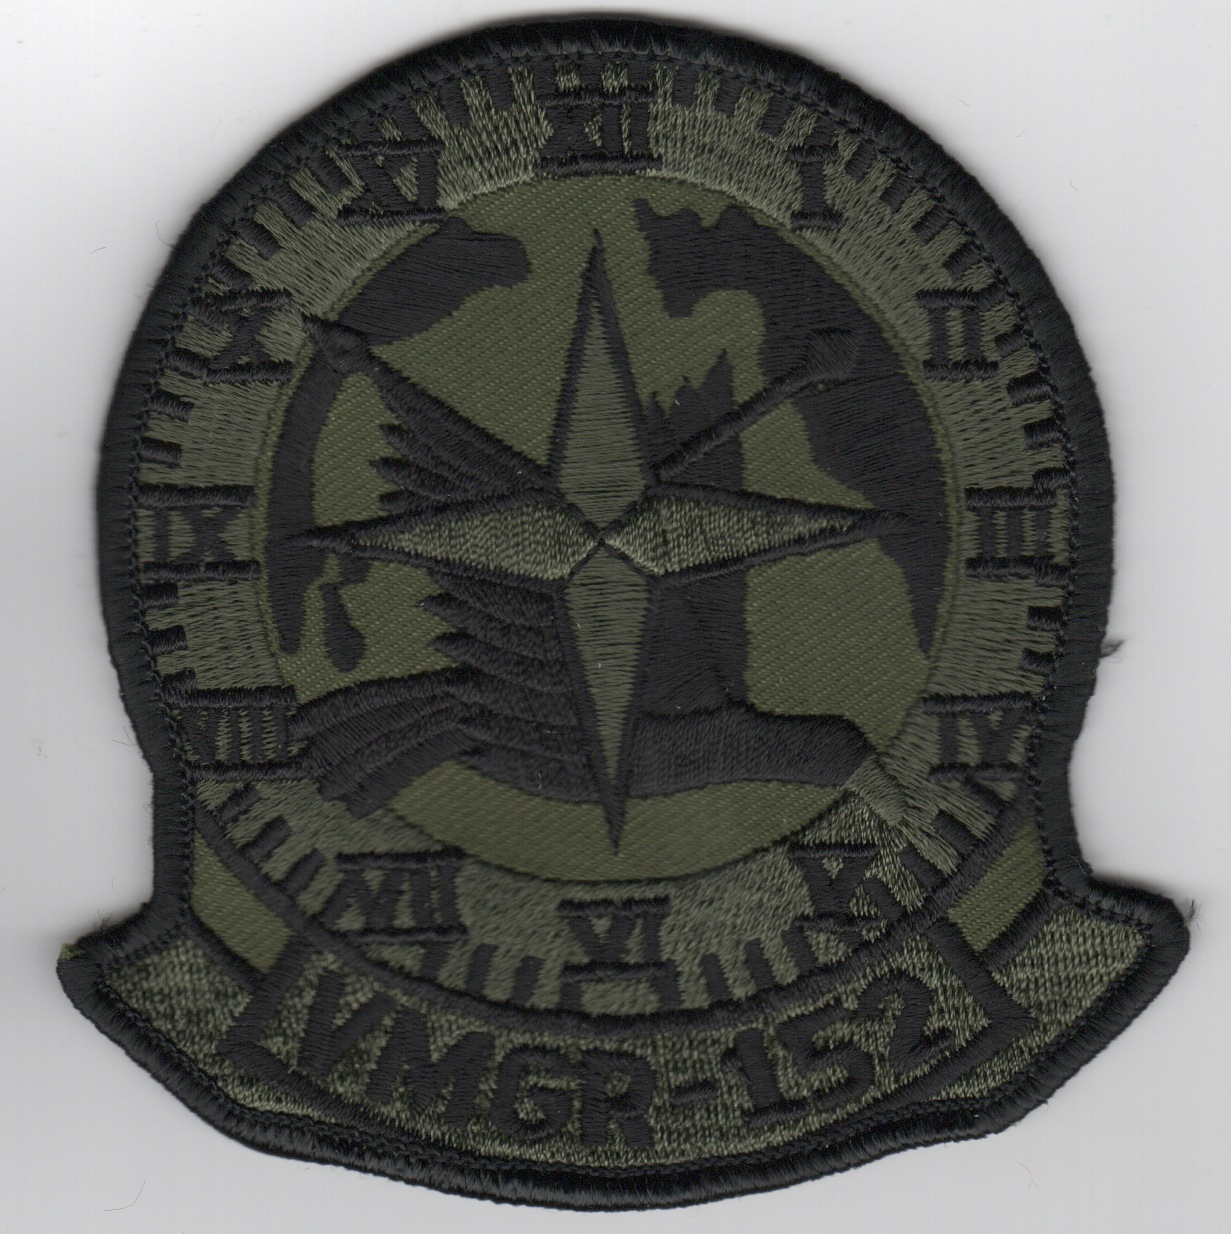 VMGR-152 Squadron Patch (Subd)